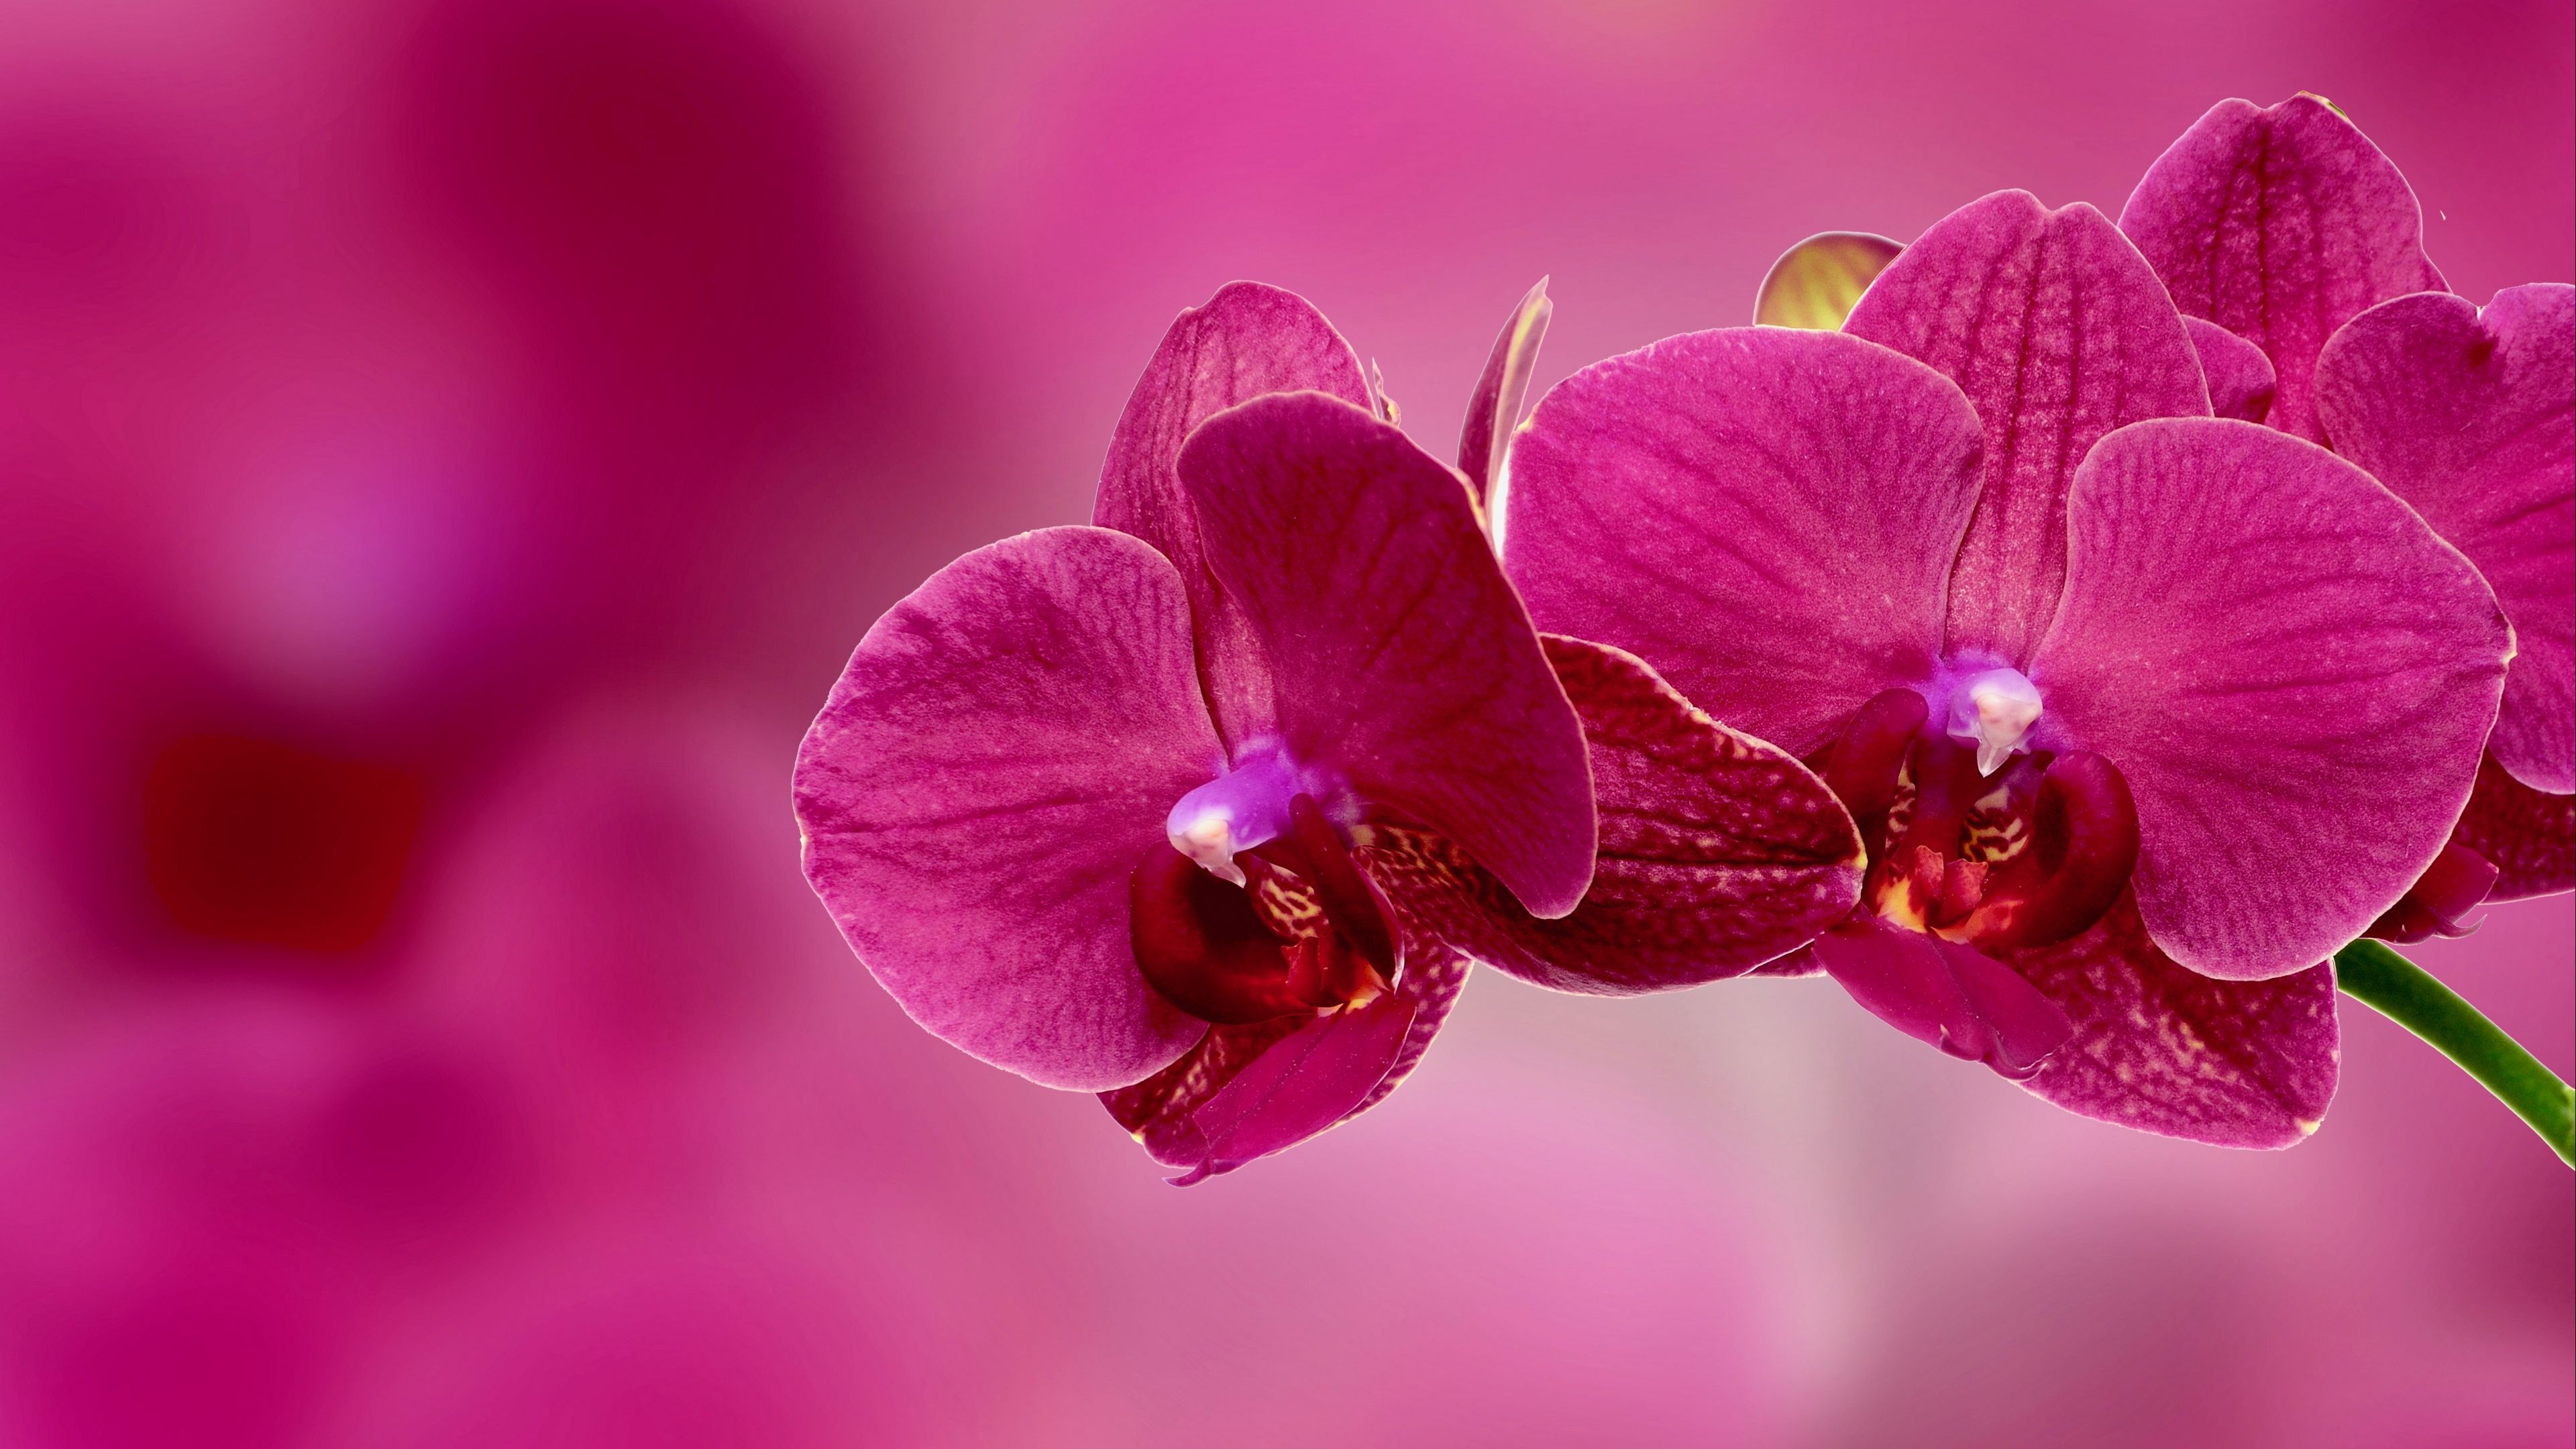 Orchid 4K wallpaper for your desktop or mobile screen free